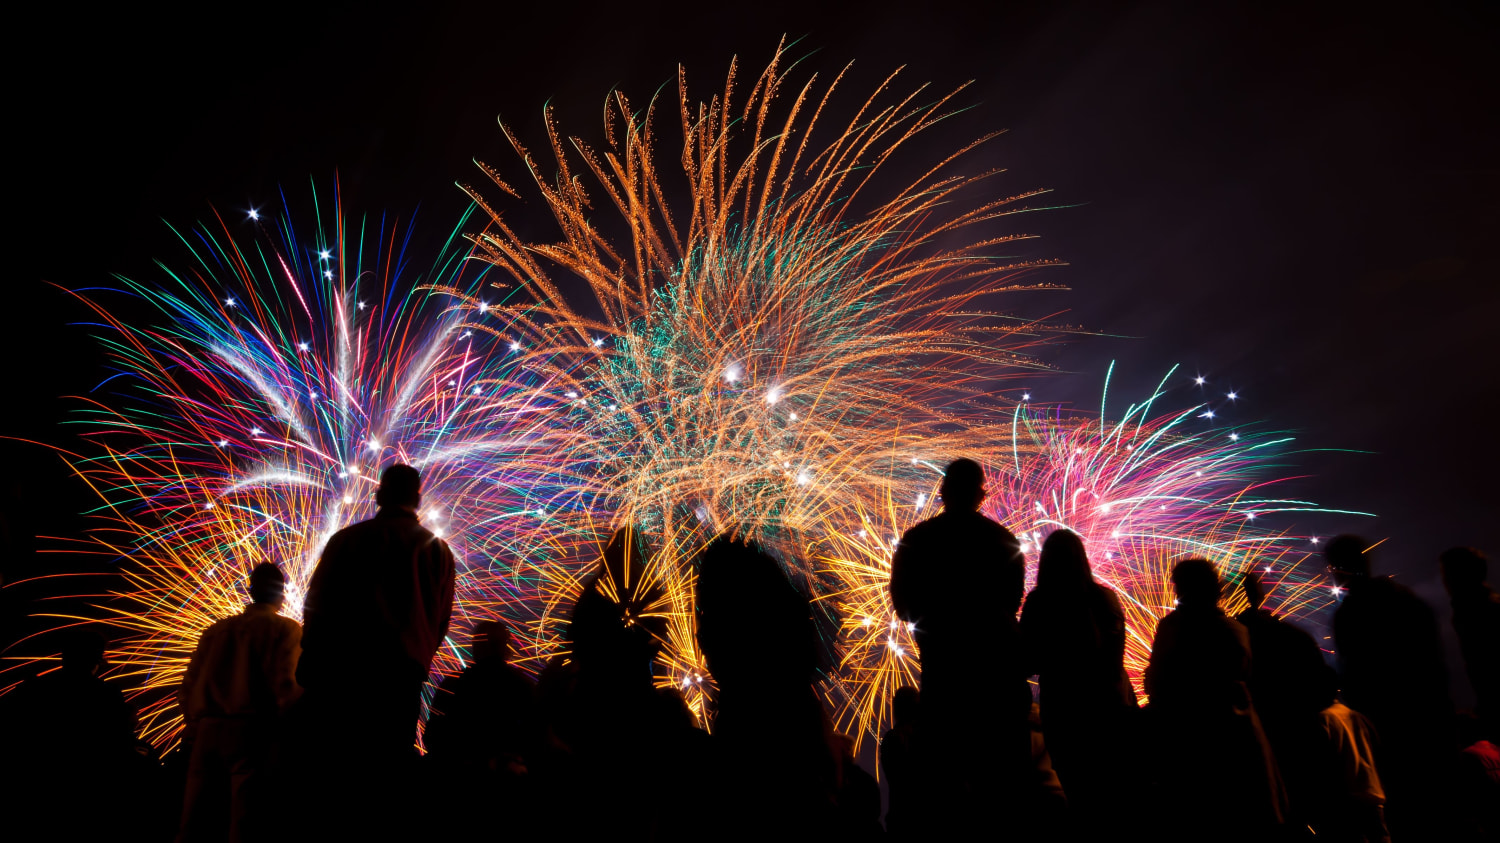 How Do Fireworks Get Their Colors?